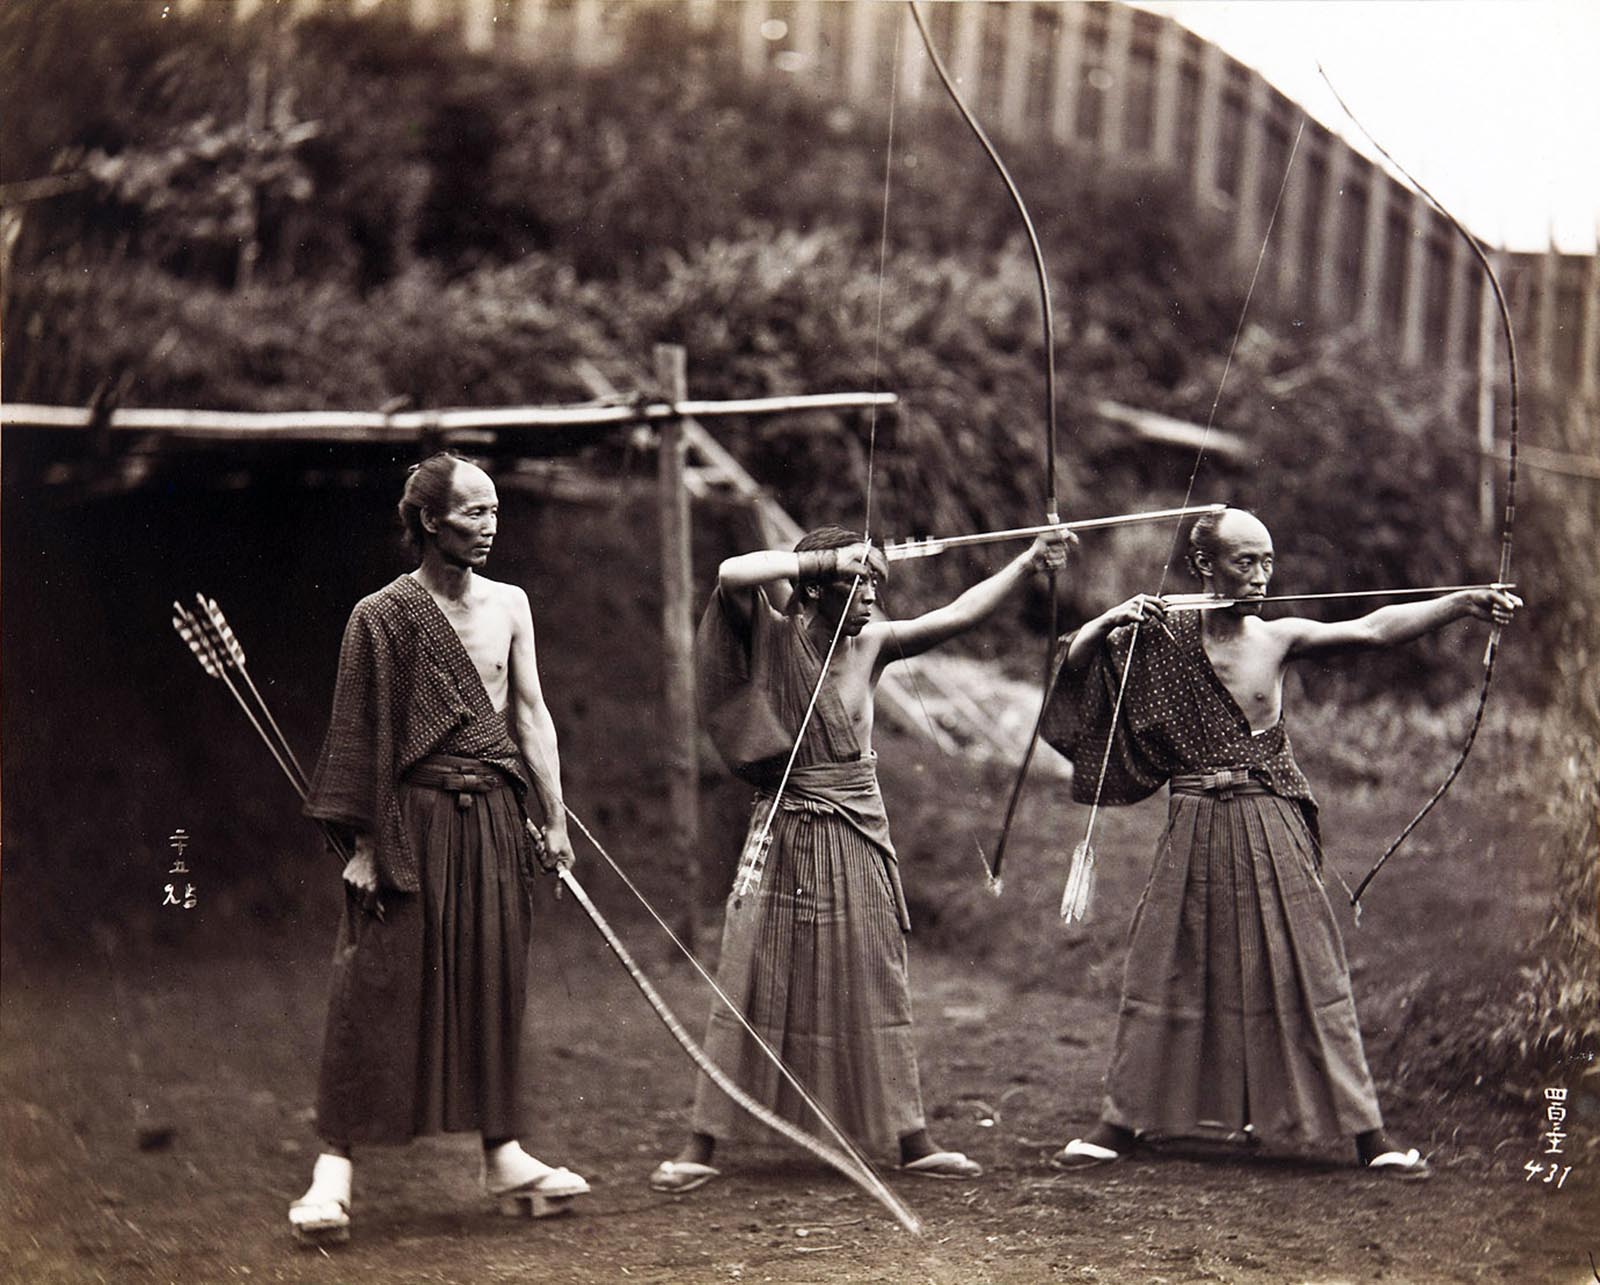 Traditional Japanese archery